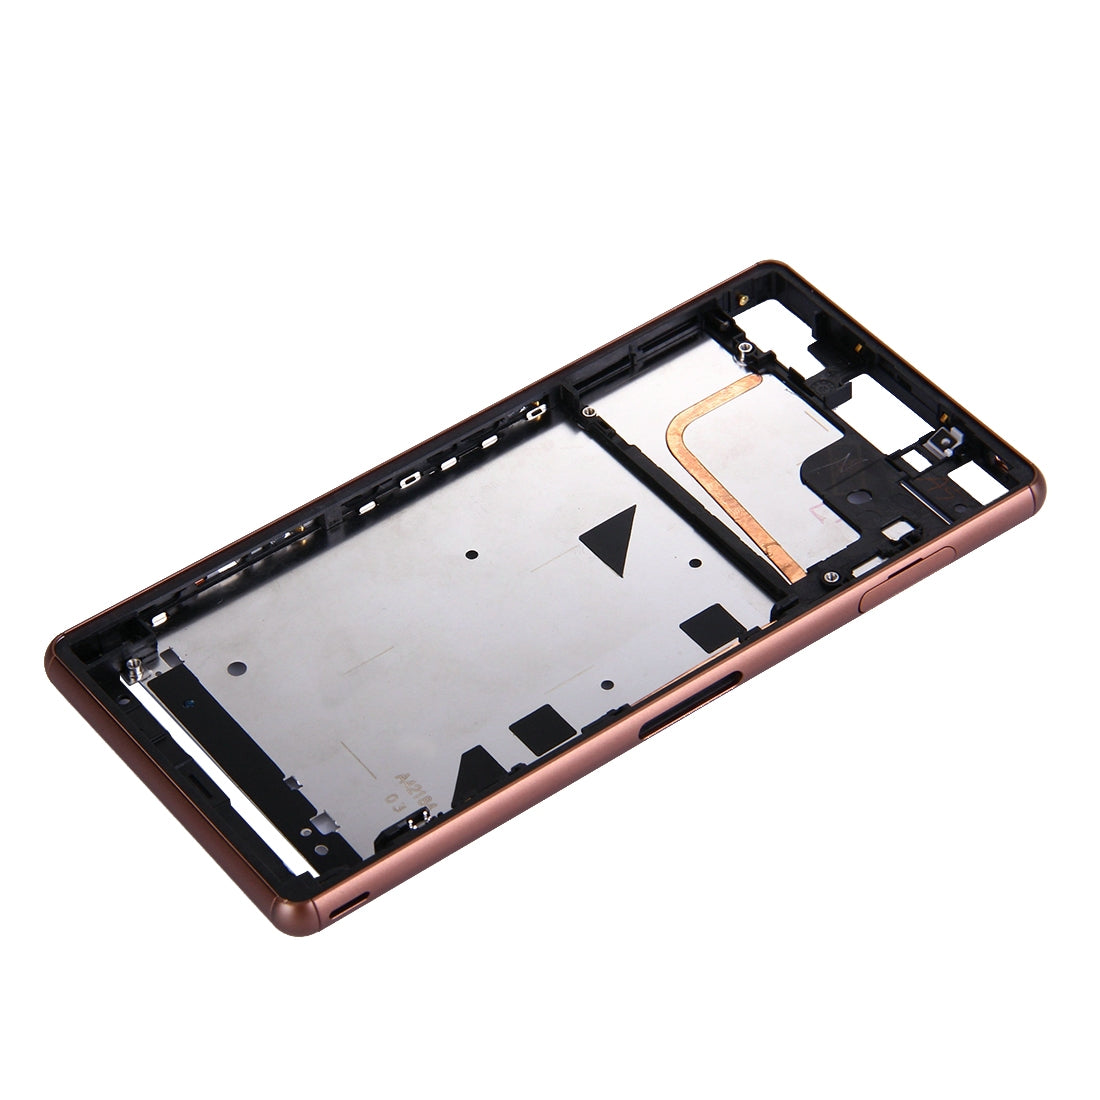 Chassis Intermediate Frame LCD Sony Xperia Z3 Brown